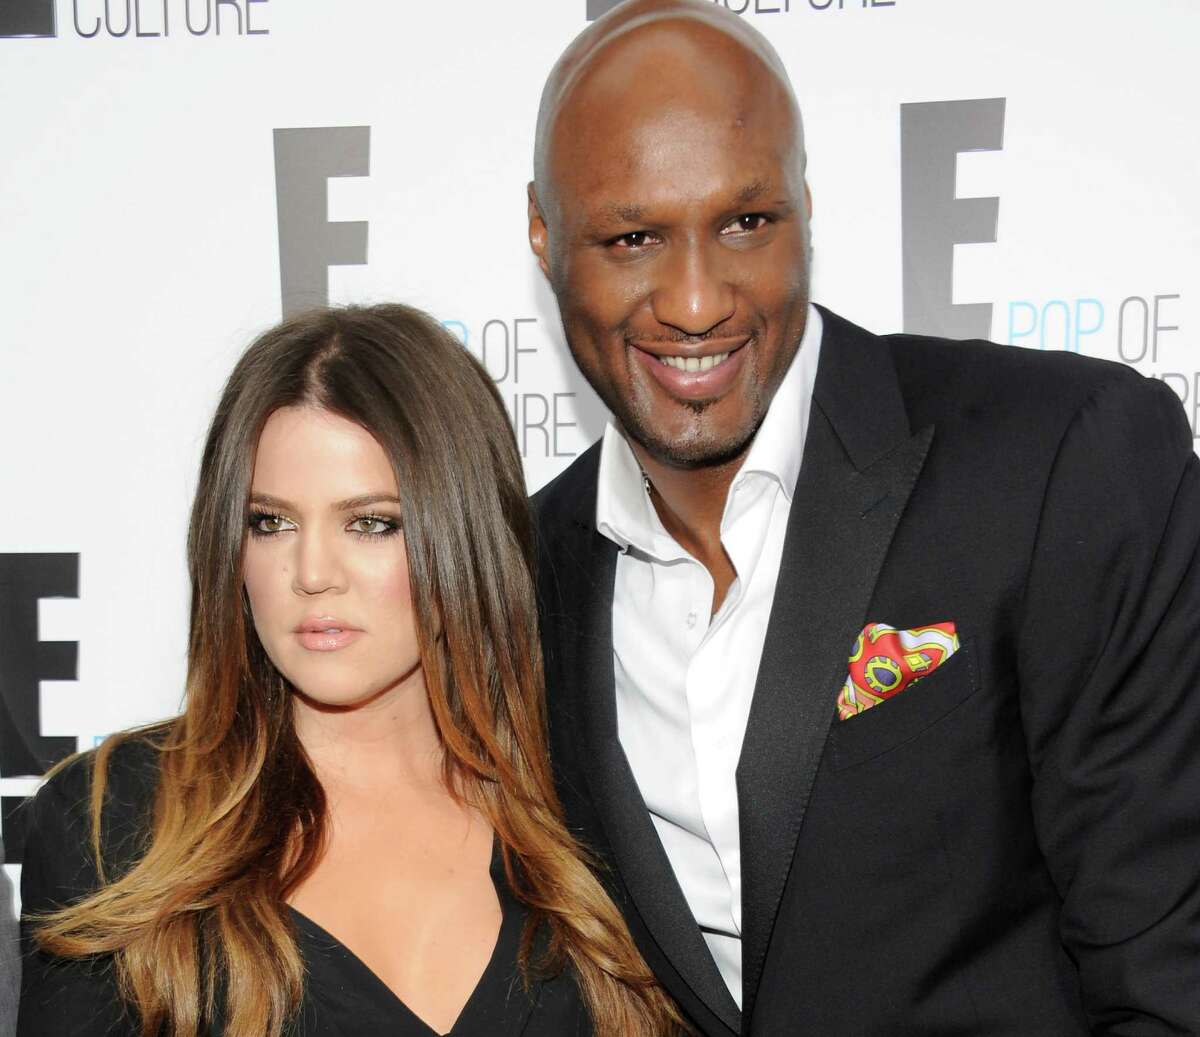 FILE - In this April 30, 2012 file photo, Khloe Kardashian Odom and Lamar Odom from the show "Keeping Up With The Kardashians" attend an E! Network upfront event at Gotham Hall in New York. After months of speculation, Kardashian is ending her four-year marriage to Odom. The Reality TV star filed for divorce Friday, Dec. 13, 2013, in Los Angeles County Superior Court, citing irreconcilable differences. (AP Photo/Evan Agostini, File)